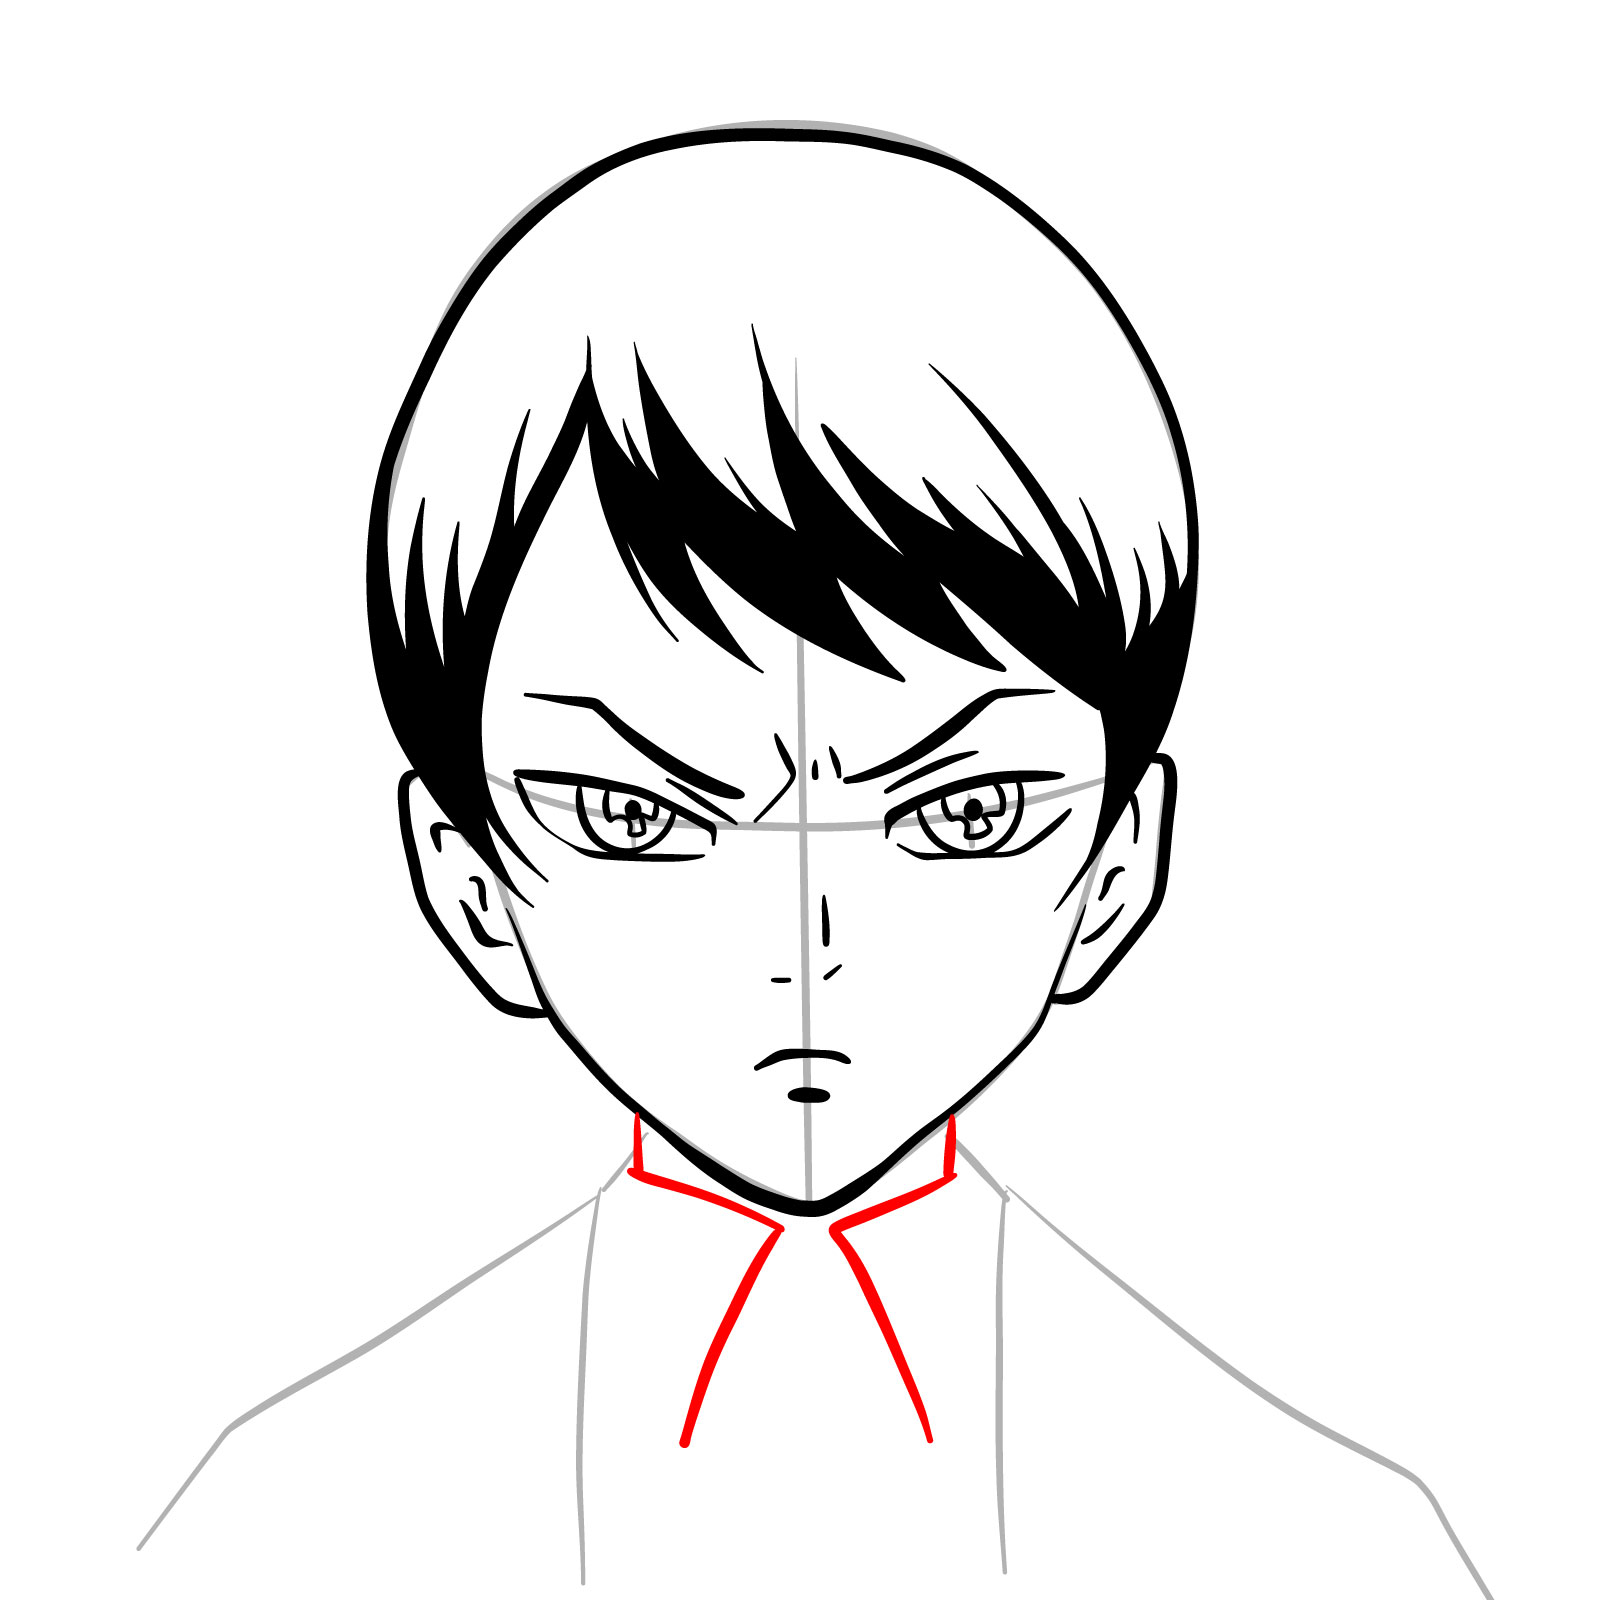 How to draw Yushiro's face from Demon Slayer - step 14